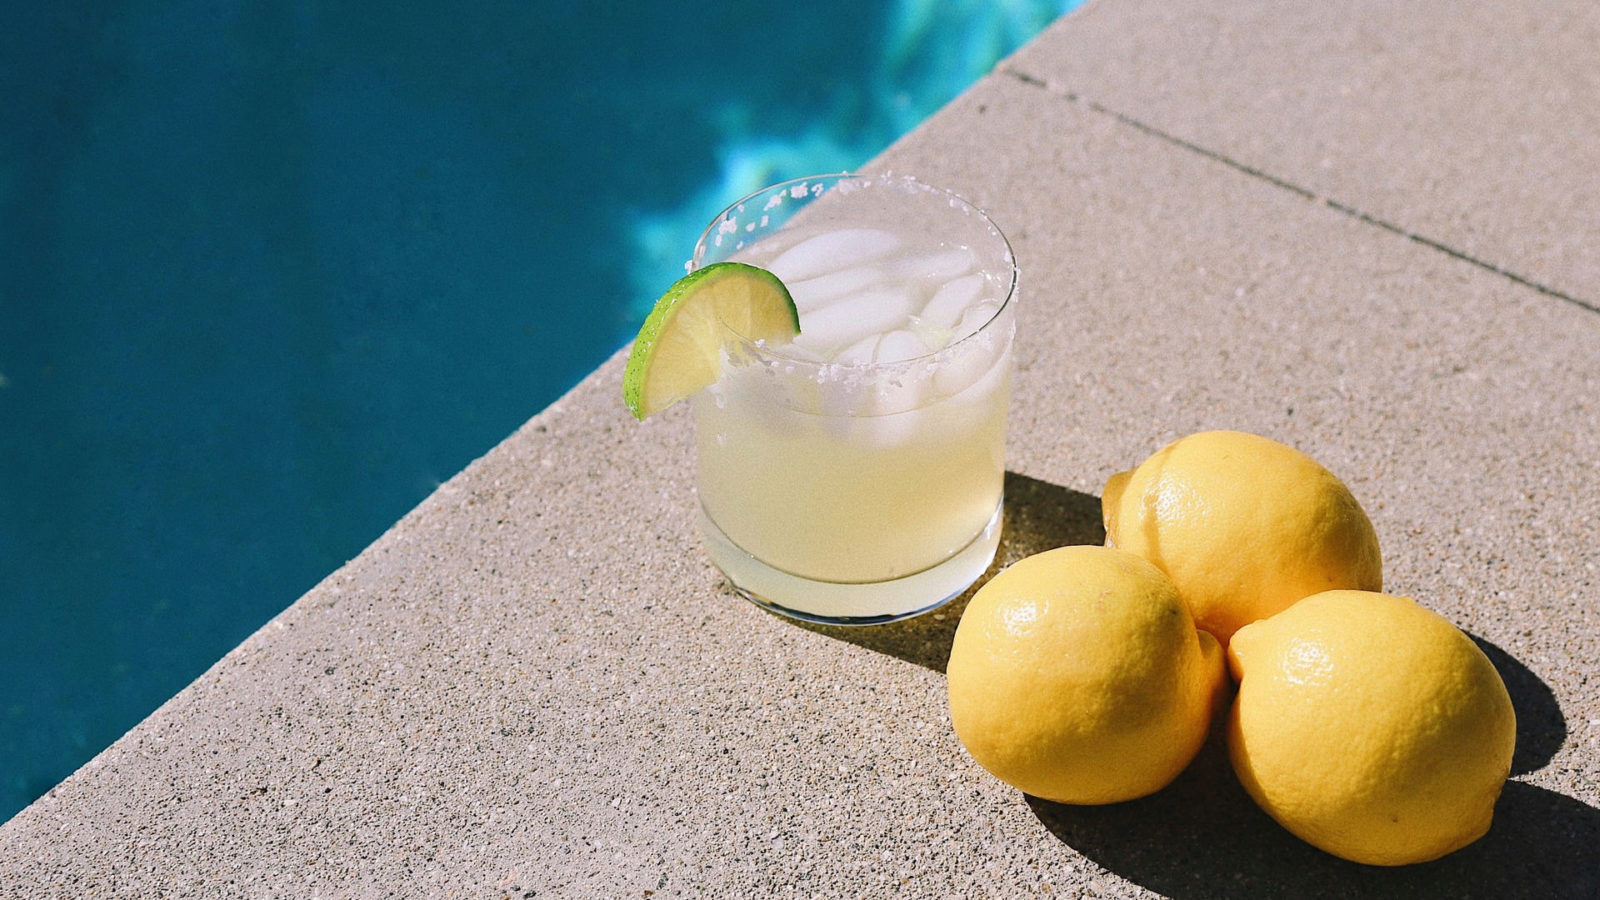 Here’s how to make the best lemonade ever this summer